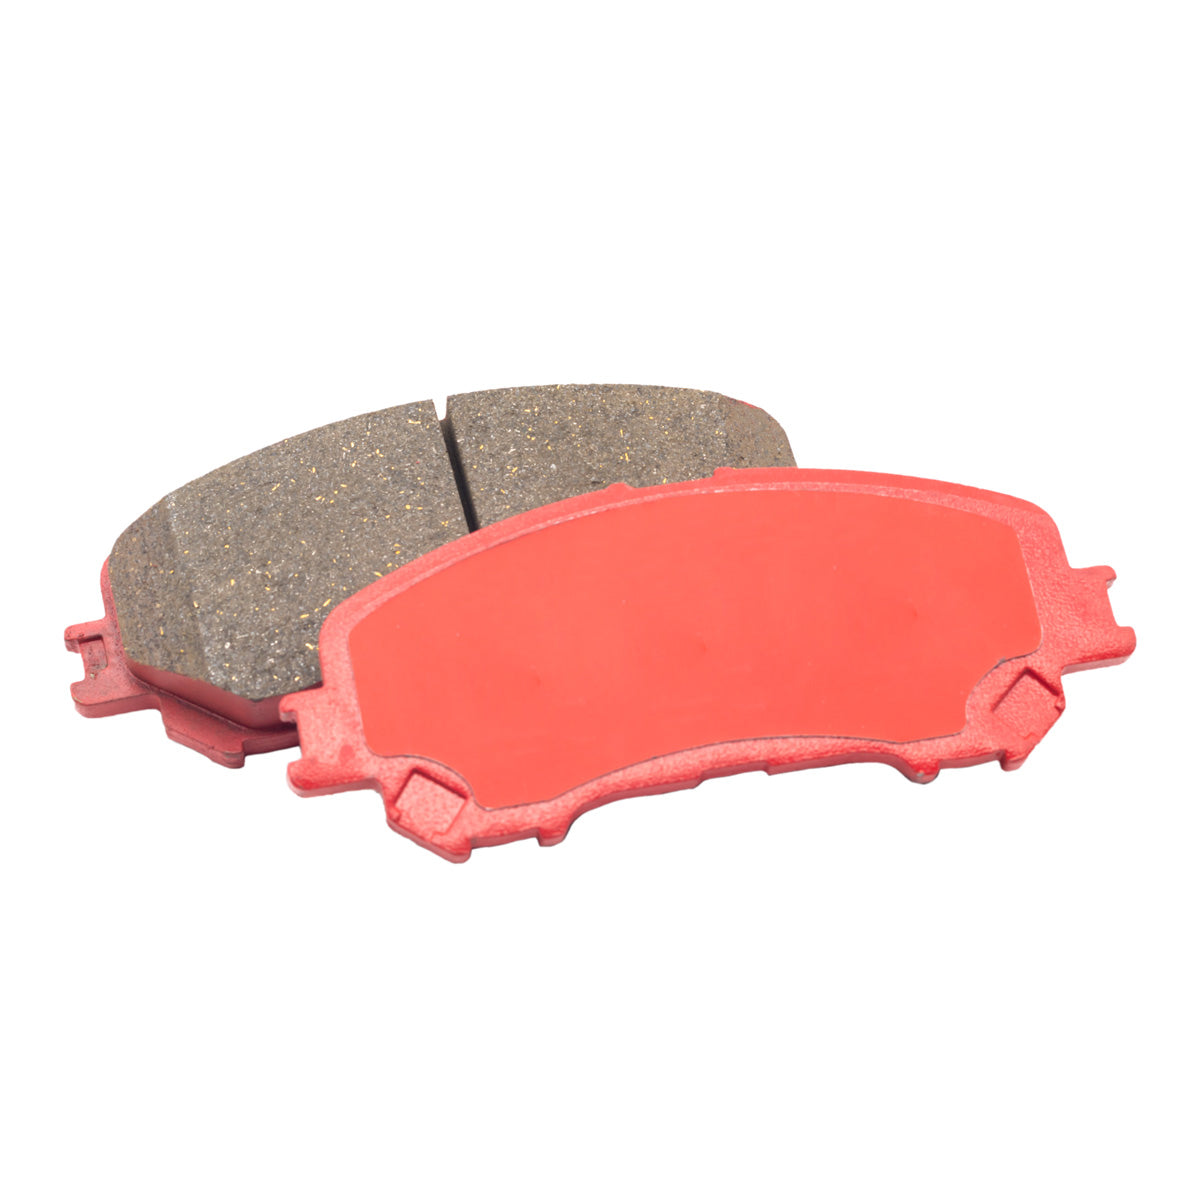 Why Choose LOOSOO High-end Vehicle Brake Pads? Loosoo is dedicated to manufacture brake pads with specific premium materials, ensuring exceptional stopping power and quiet operation with low dust. We have advanced production, research, and testing equipments and have developed a series of car brake pads and rotors with various formulations to meet the different needs of various countries.